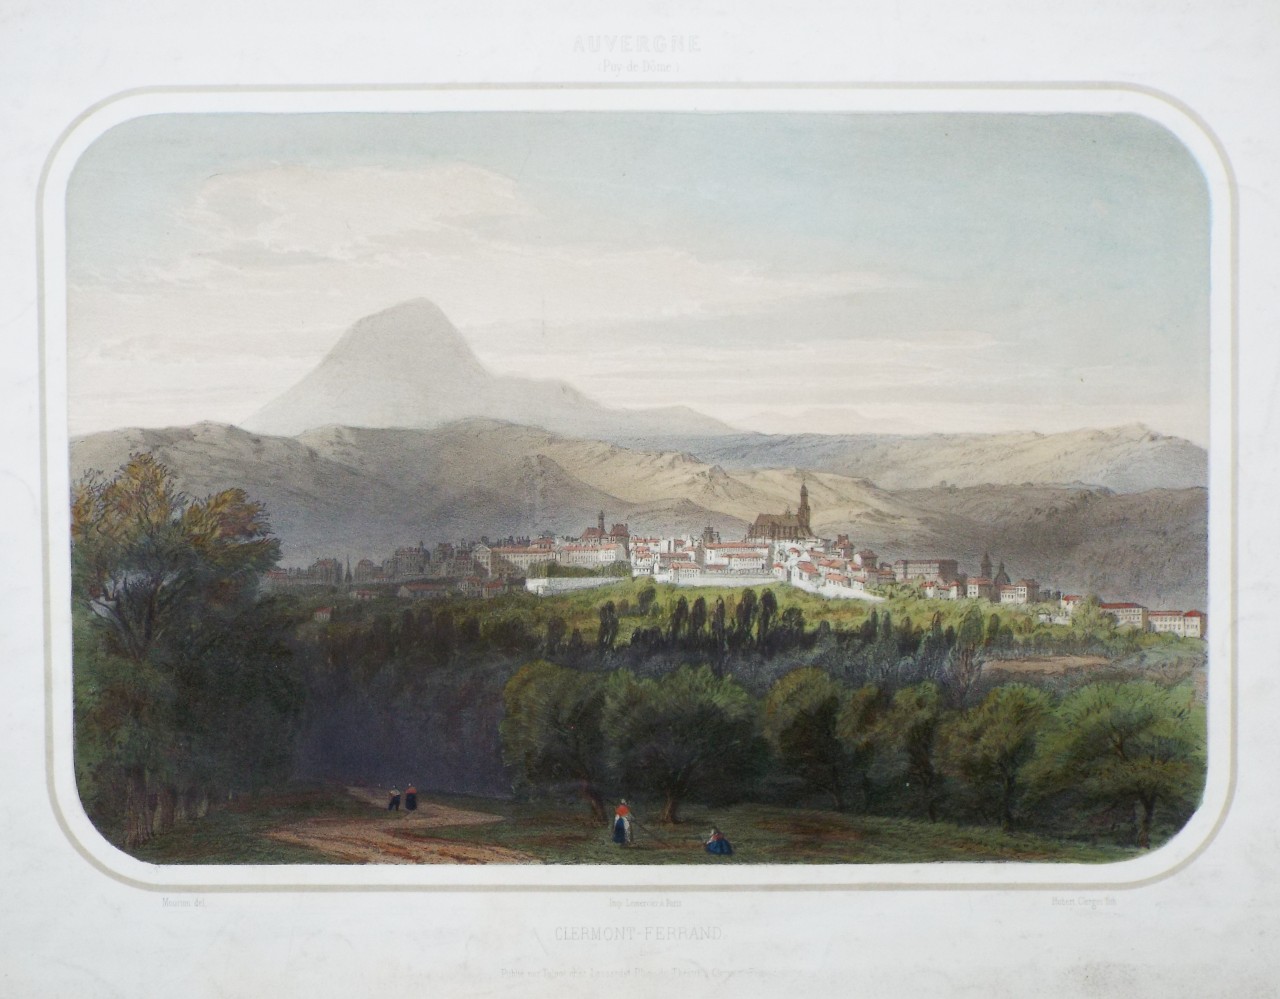 Lithograph - Clermont-Ferand. 1. - Clerget